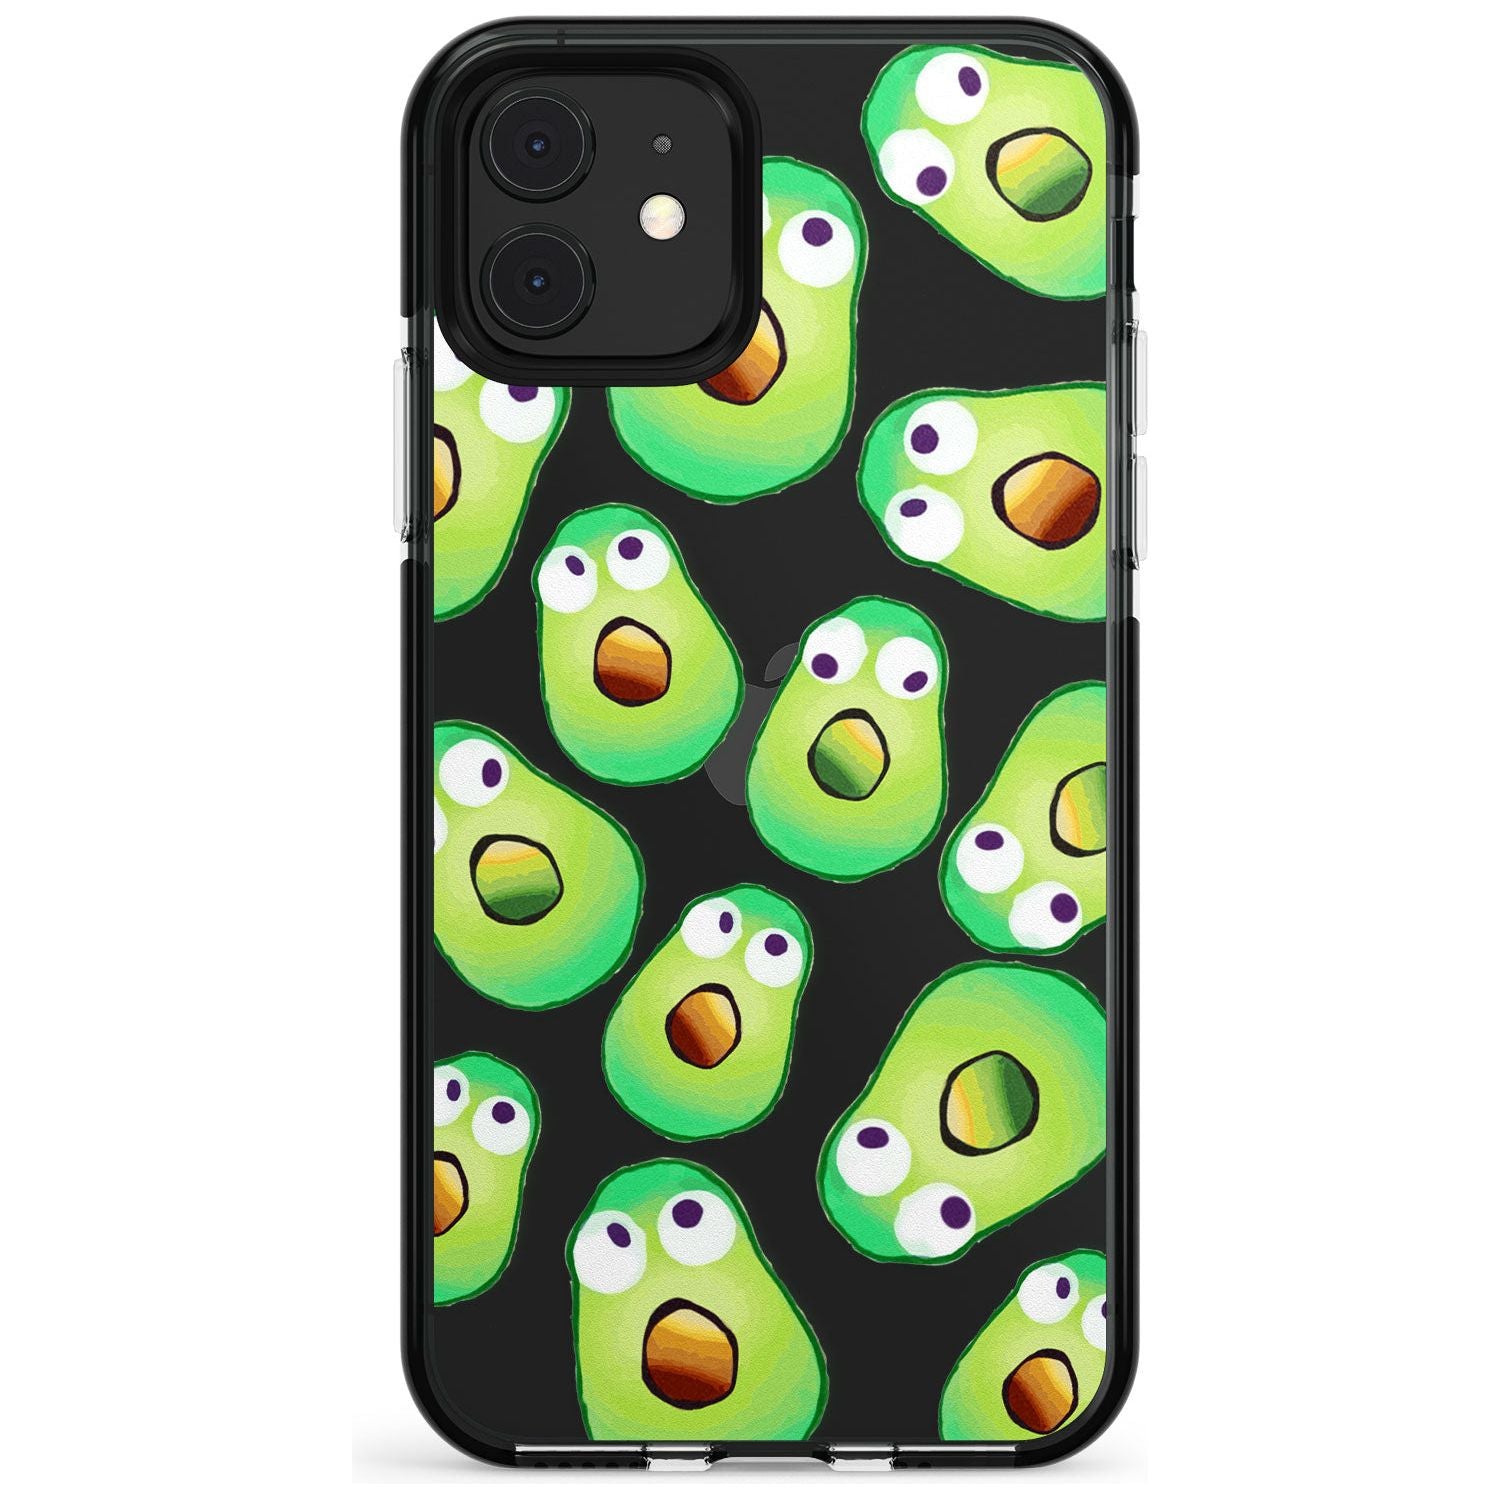 Shocked Avocados Black Impact Phone Case for iPhone 11 Pro Max